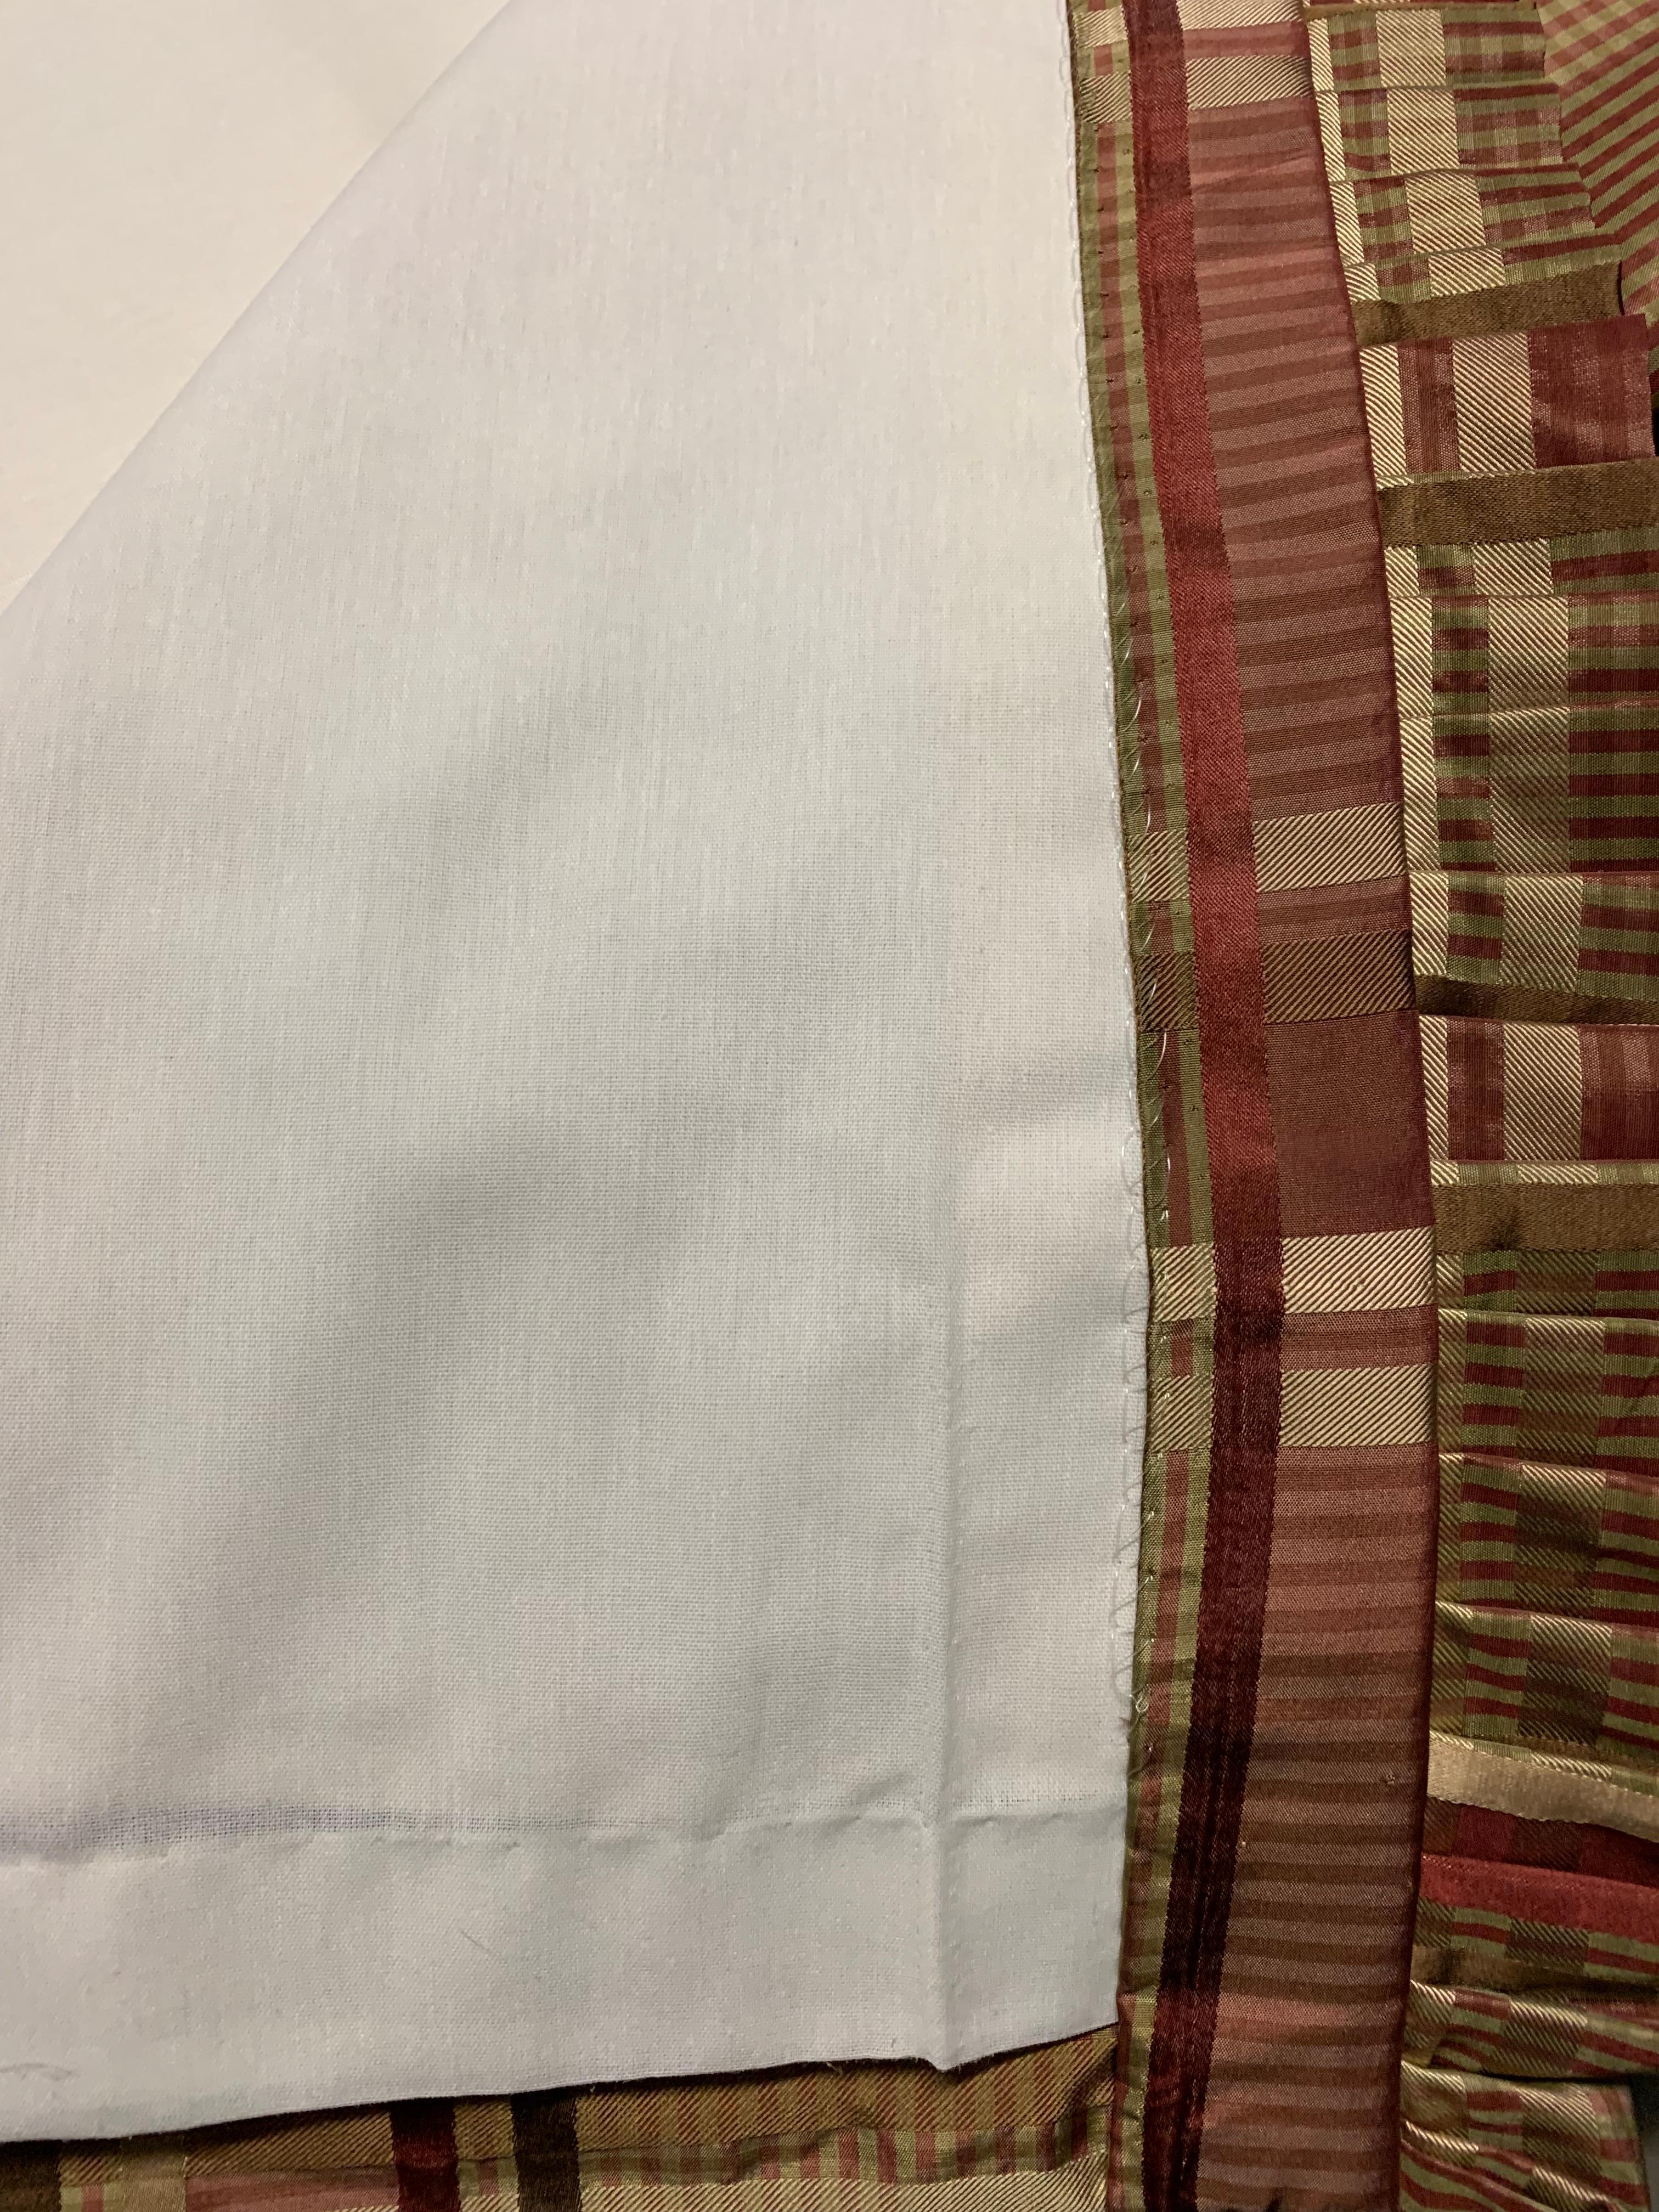 Silk Lined Draperies  of Schumacher Fabric  - 2 panels For Sale 2